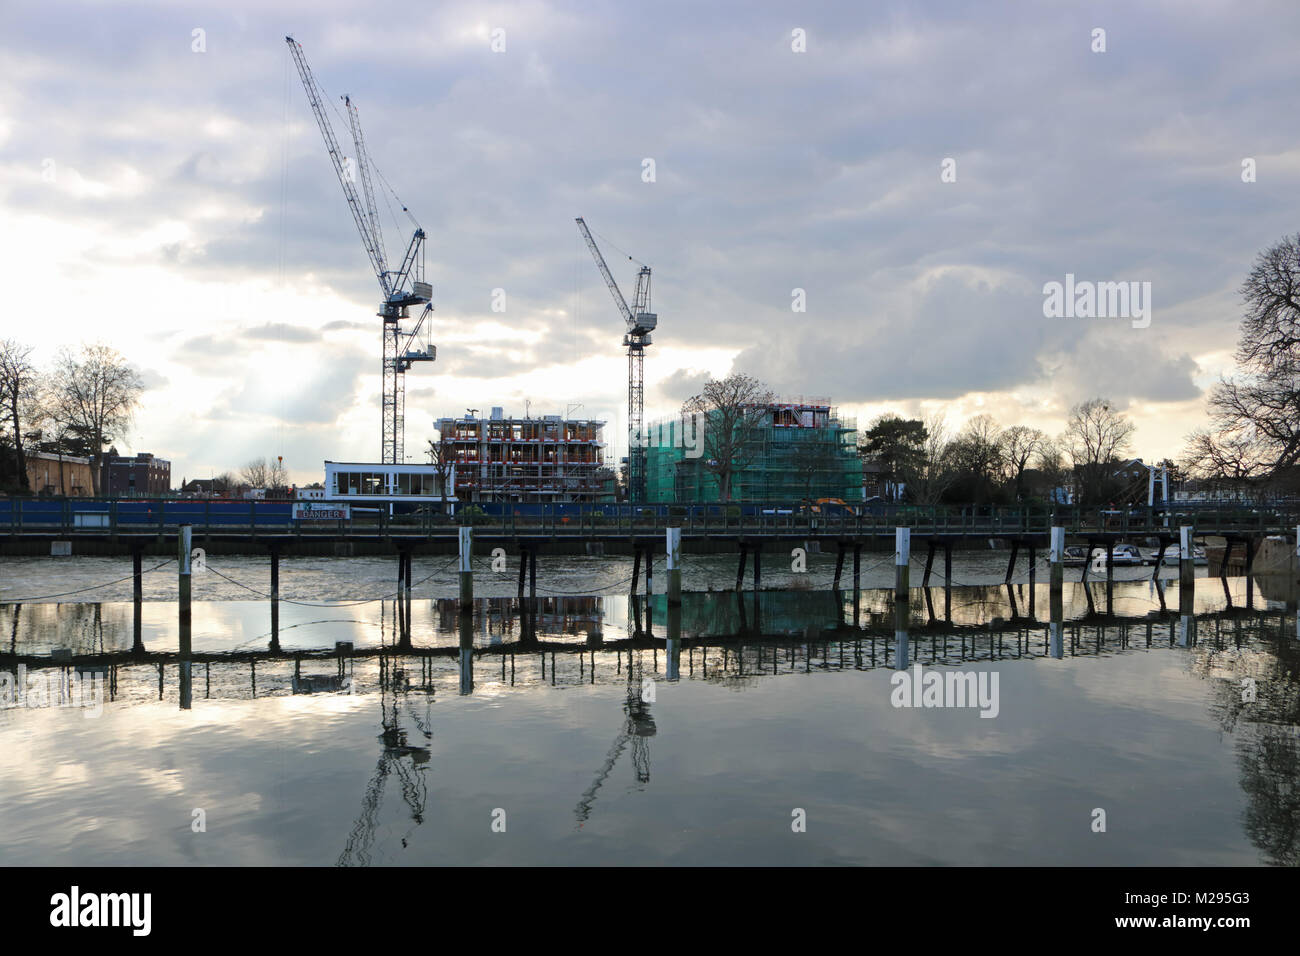 Teddington, London, UK. 6th Feb, 2018. UK Weather. Construction of new housing development on the old Thames Studio site at Teddington, on a bitterly cold day beside the River Thames where the temperature only reached 3 degrees. Credit: Julia Gavin/Alamy Live News Stock Photo